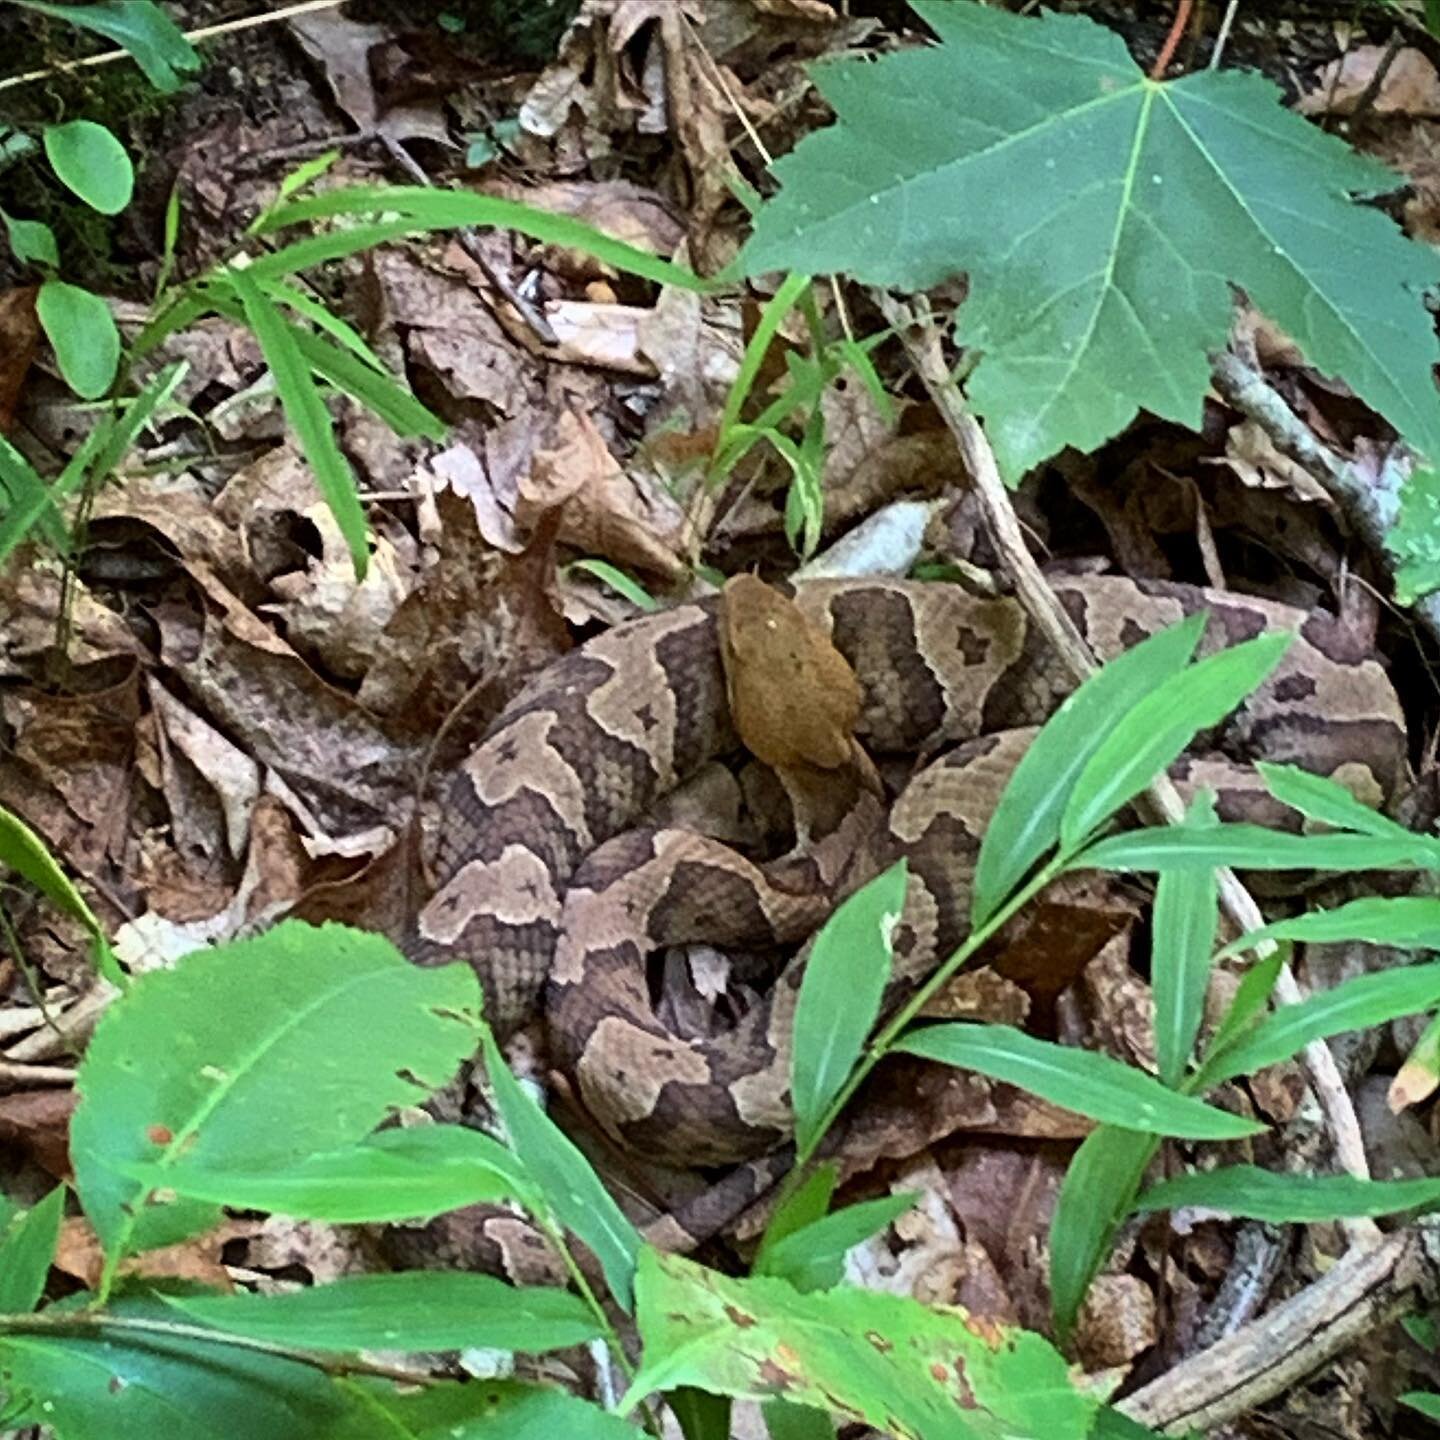 Celebrated #worldsnakeday with this calm but dangerous copperhead. Stay alert out there  y&rsquo;all. 
Pick 2 is no filter and cam-ou-flage.
.
#copperhead #herpsofinstagram #watchyostep #snakesarecool